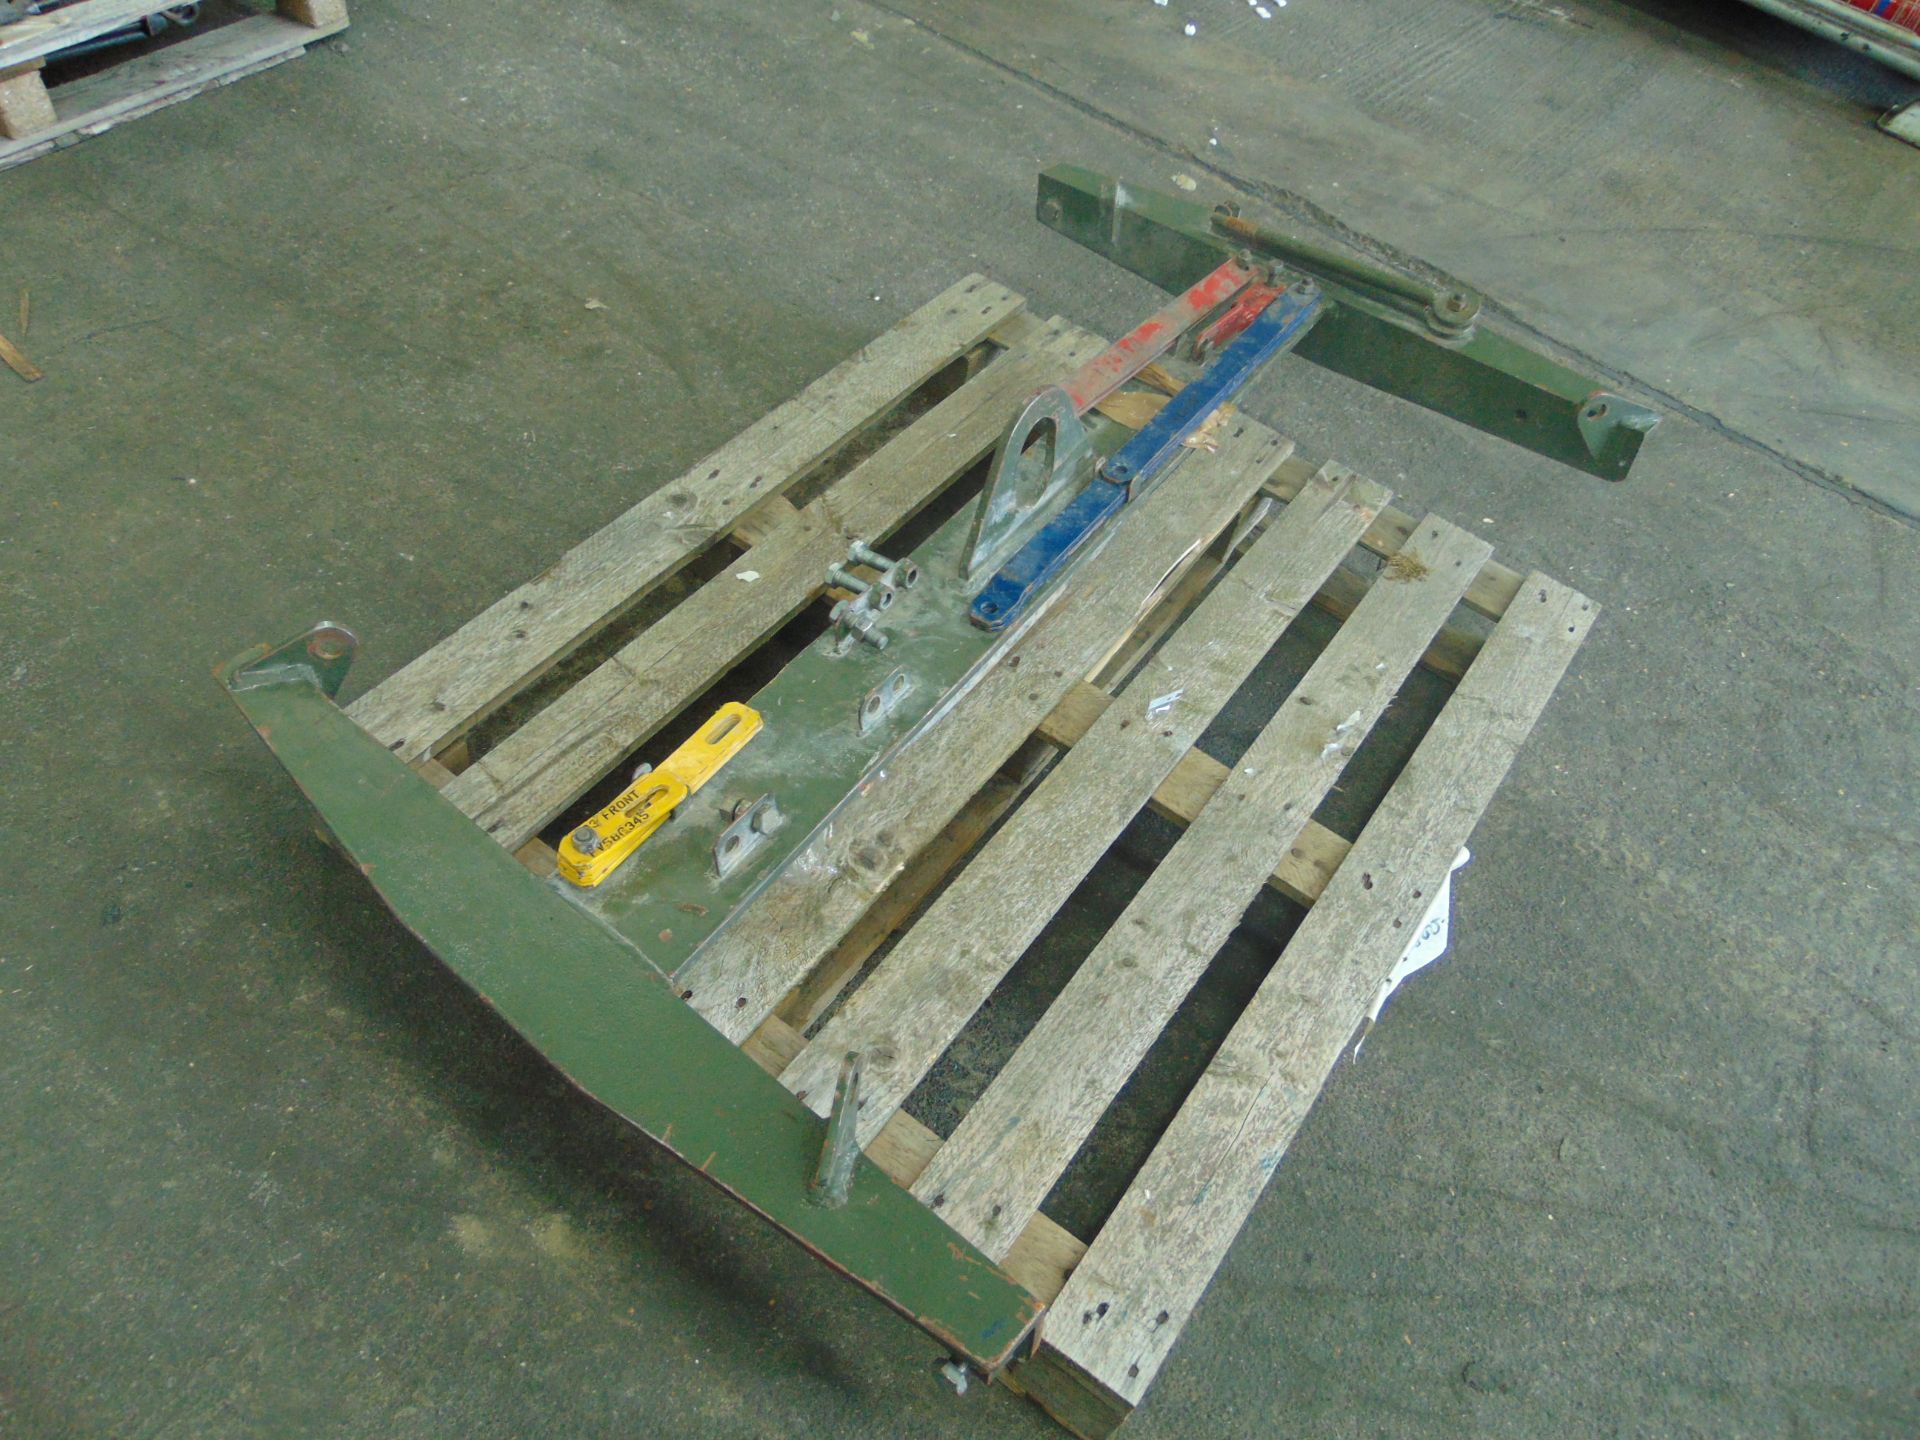 Extremely Rare Original FV432 Pack Lifting Frame Complete with Attachments - Image 2 of 6